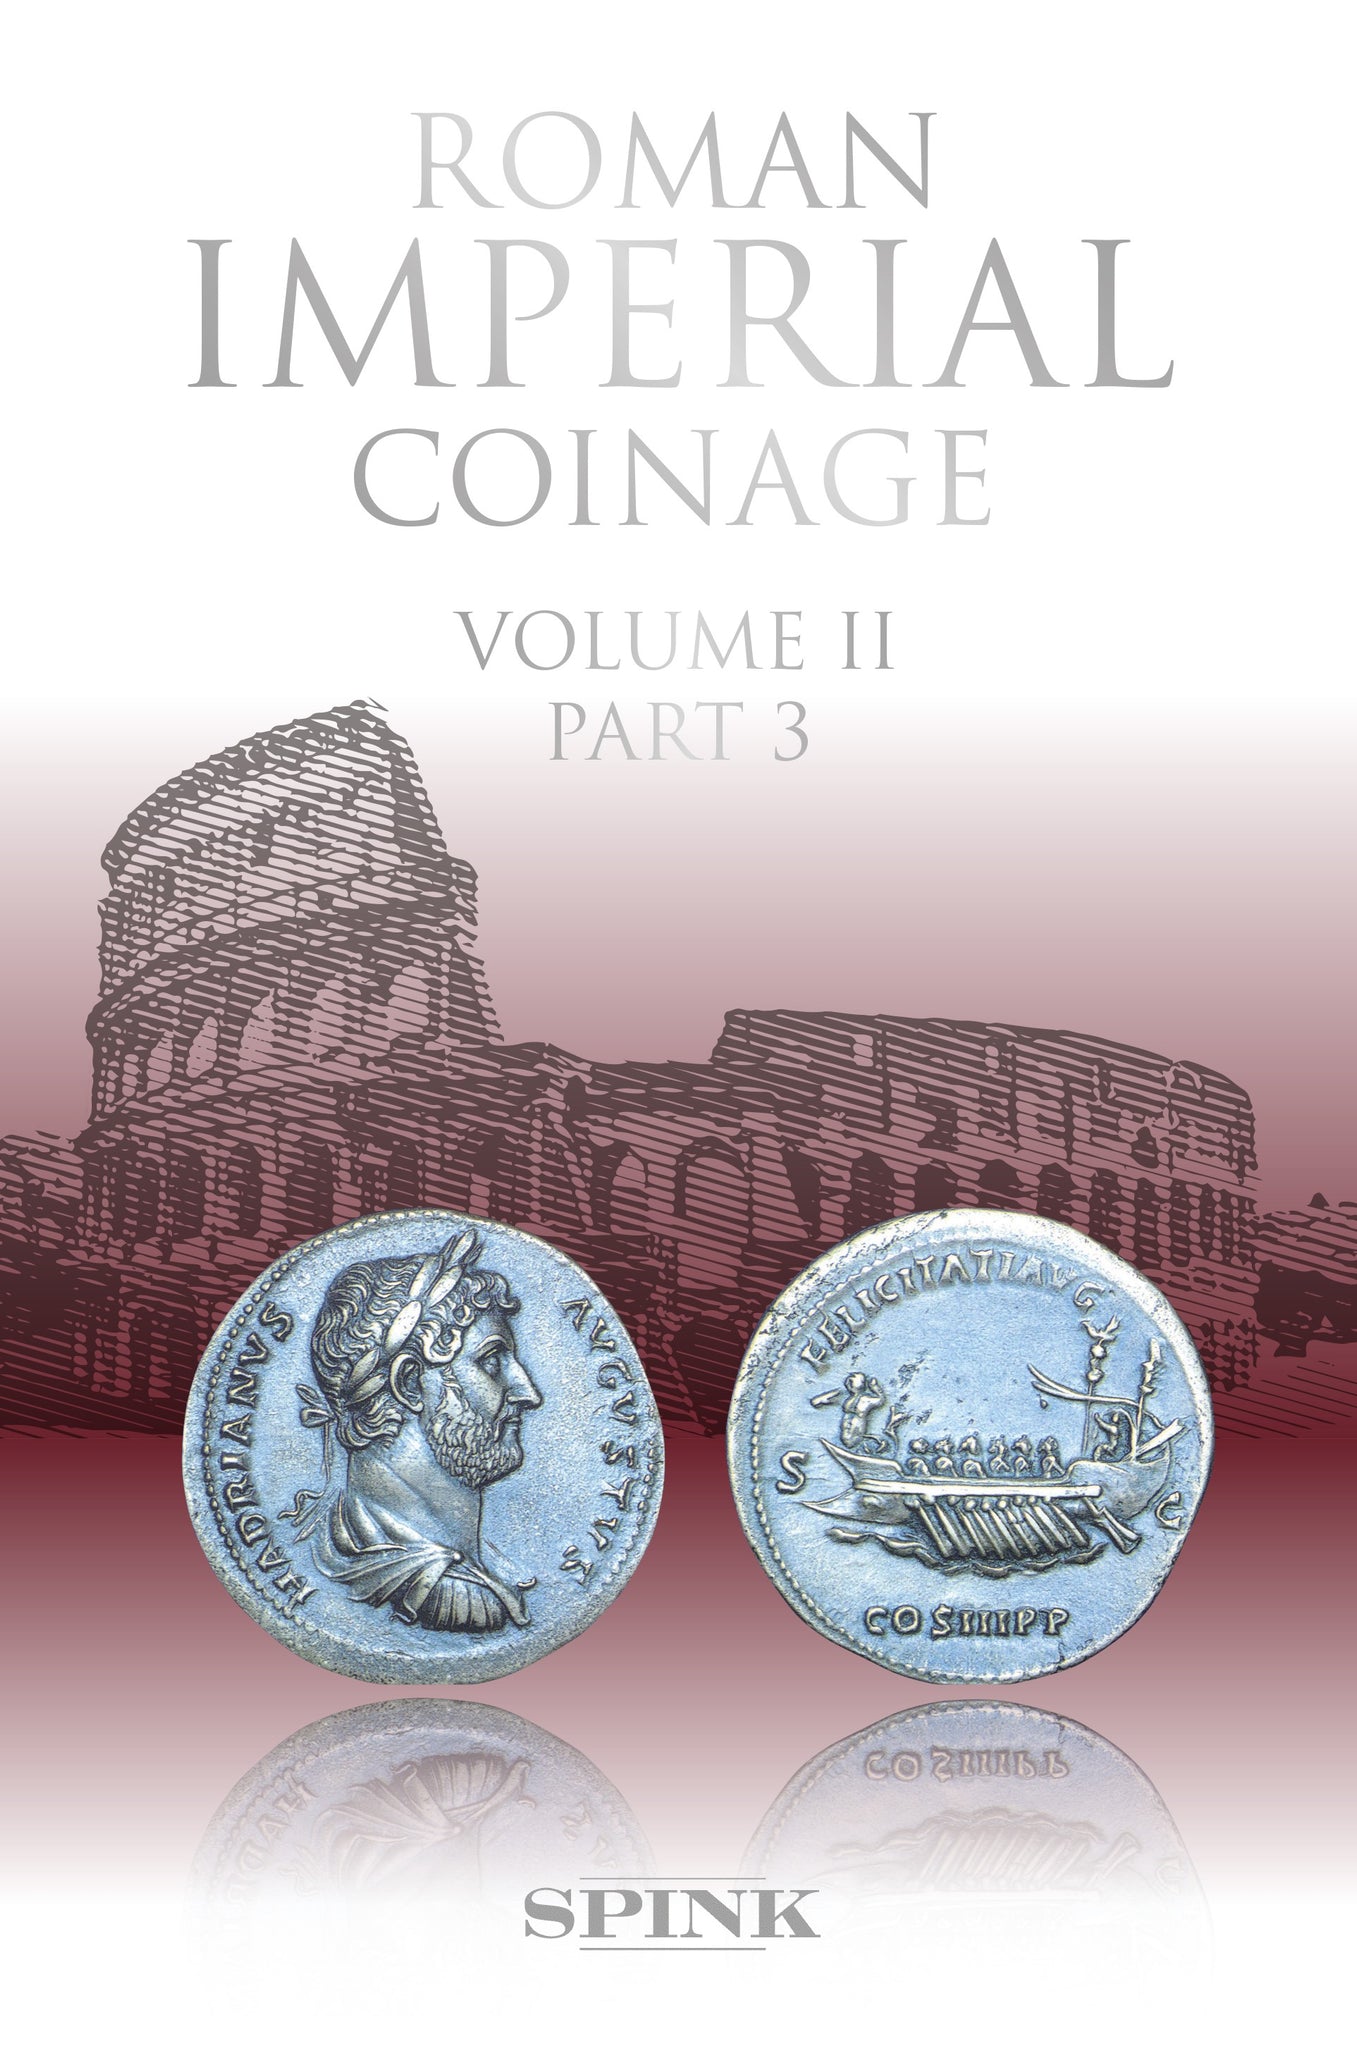 Roman Imperial Coinage II.3: From AD 117 to AD 138 Hadrian by RA Abdy with PF Mittag (downloadable PDF)